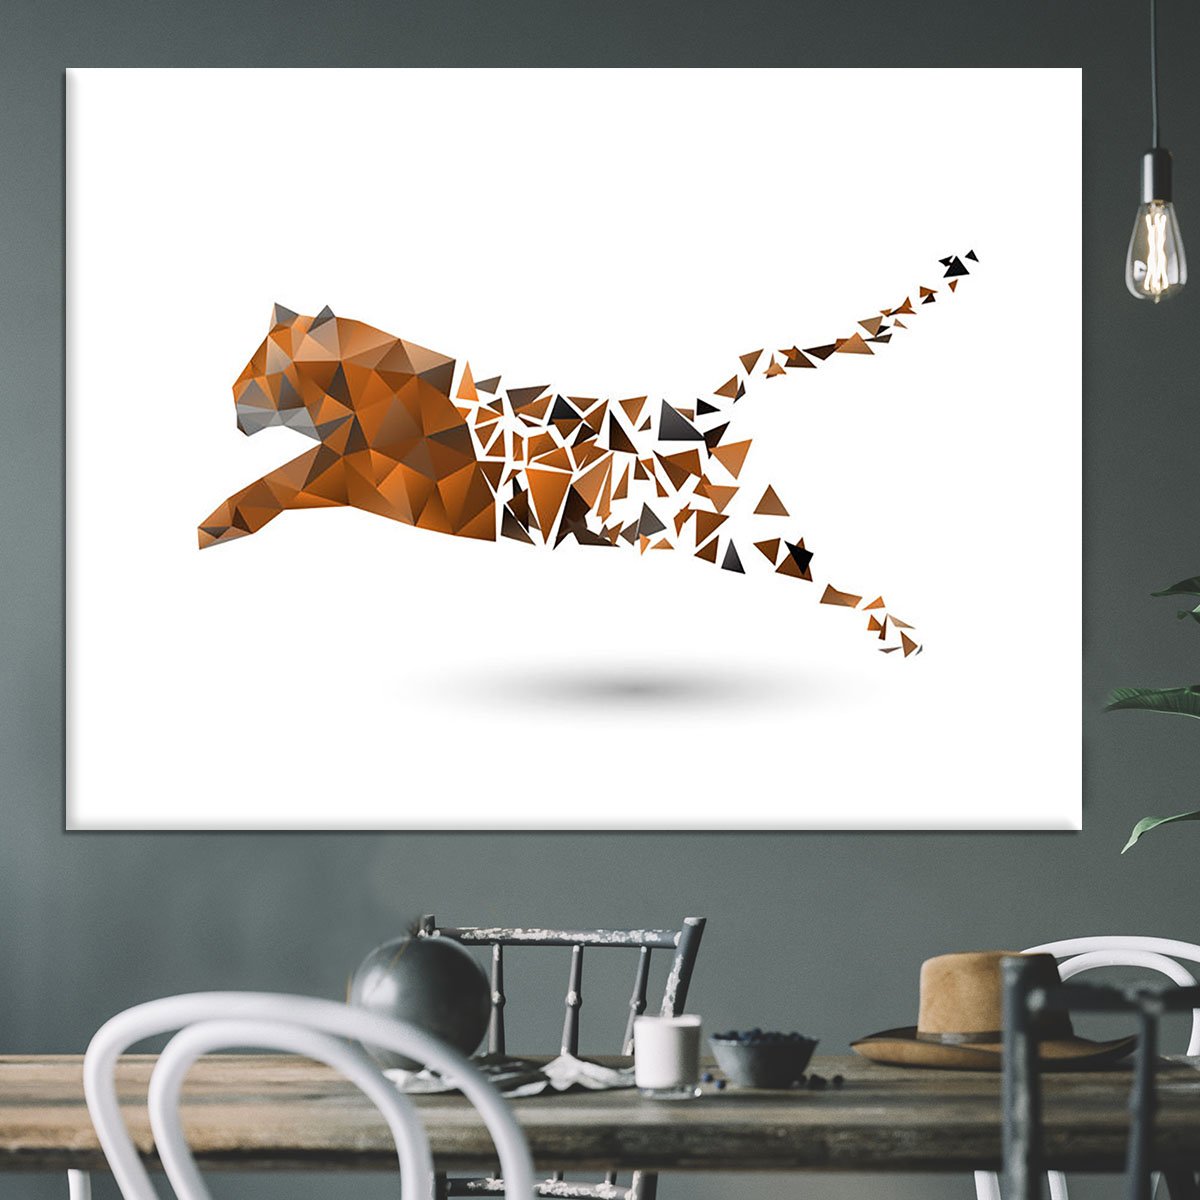 Leaping tiger made from polygons Canvas Print or Poster